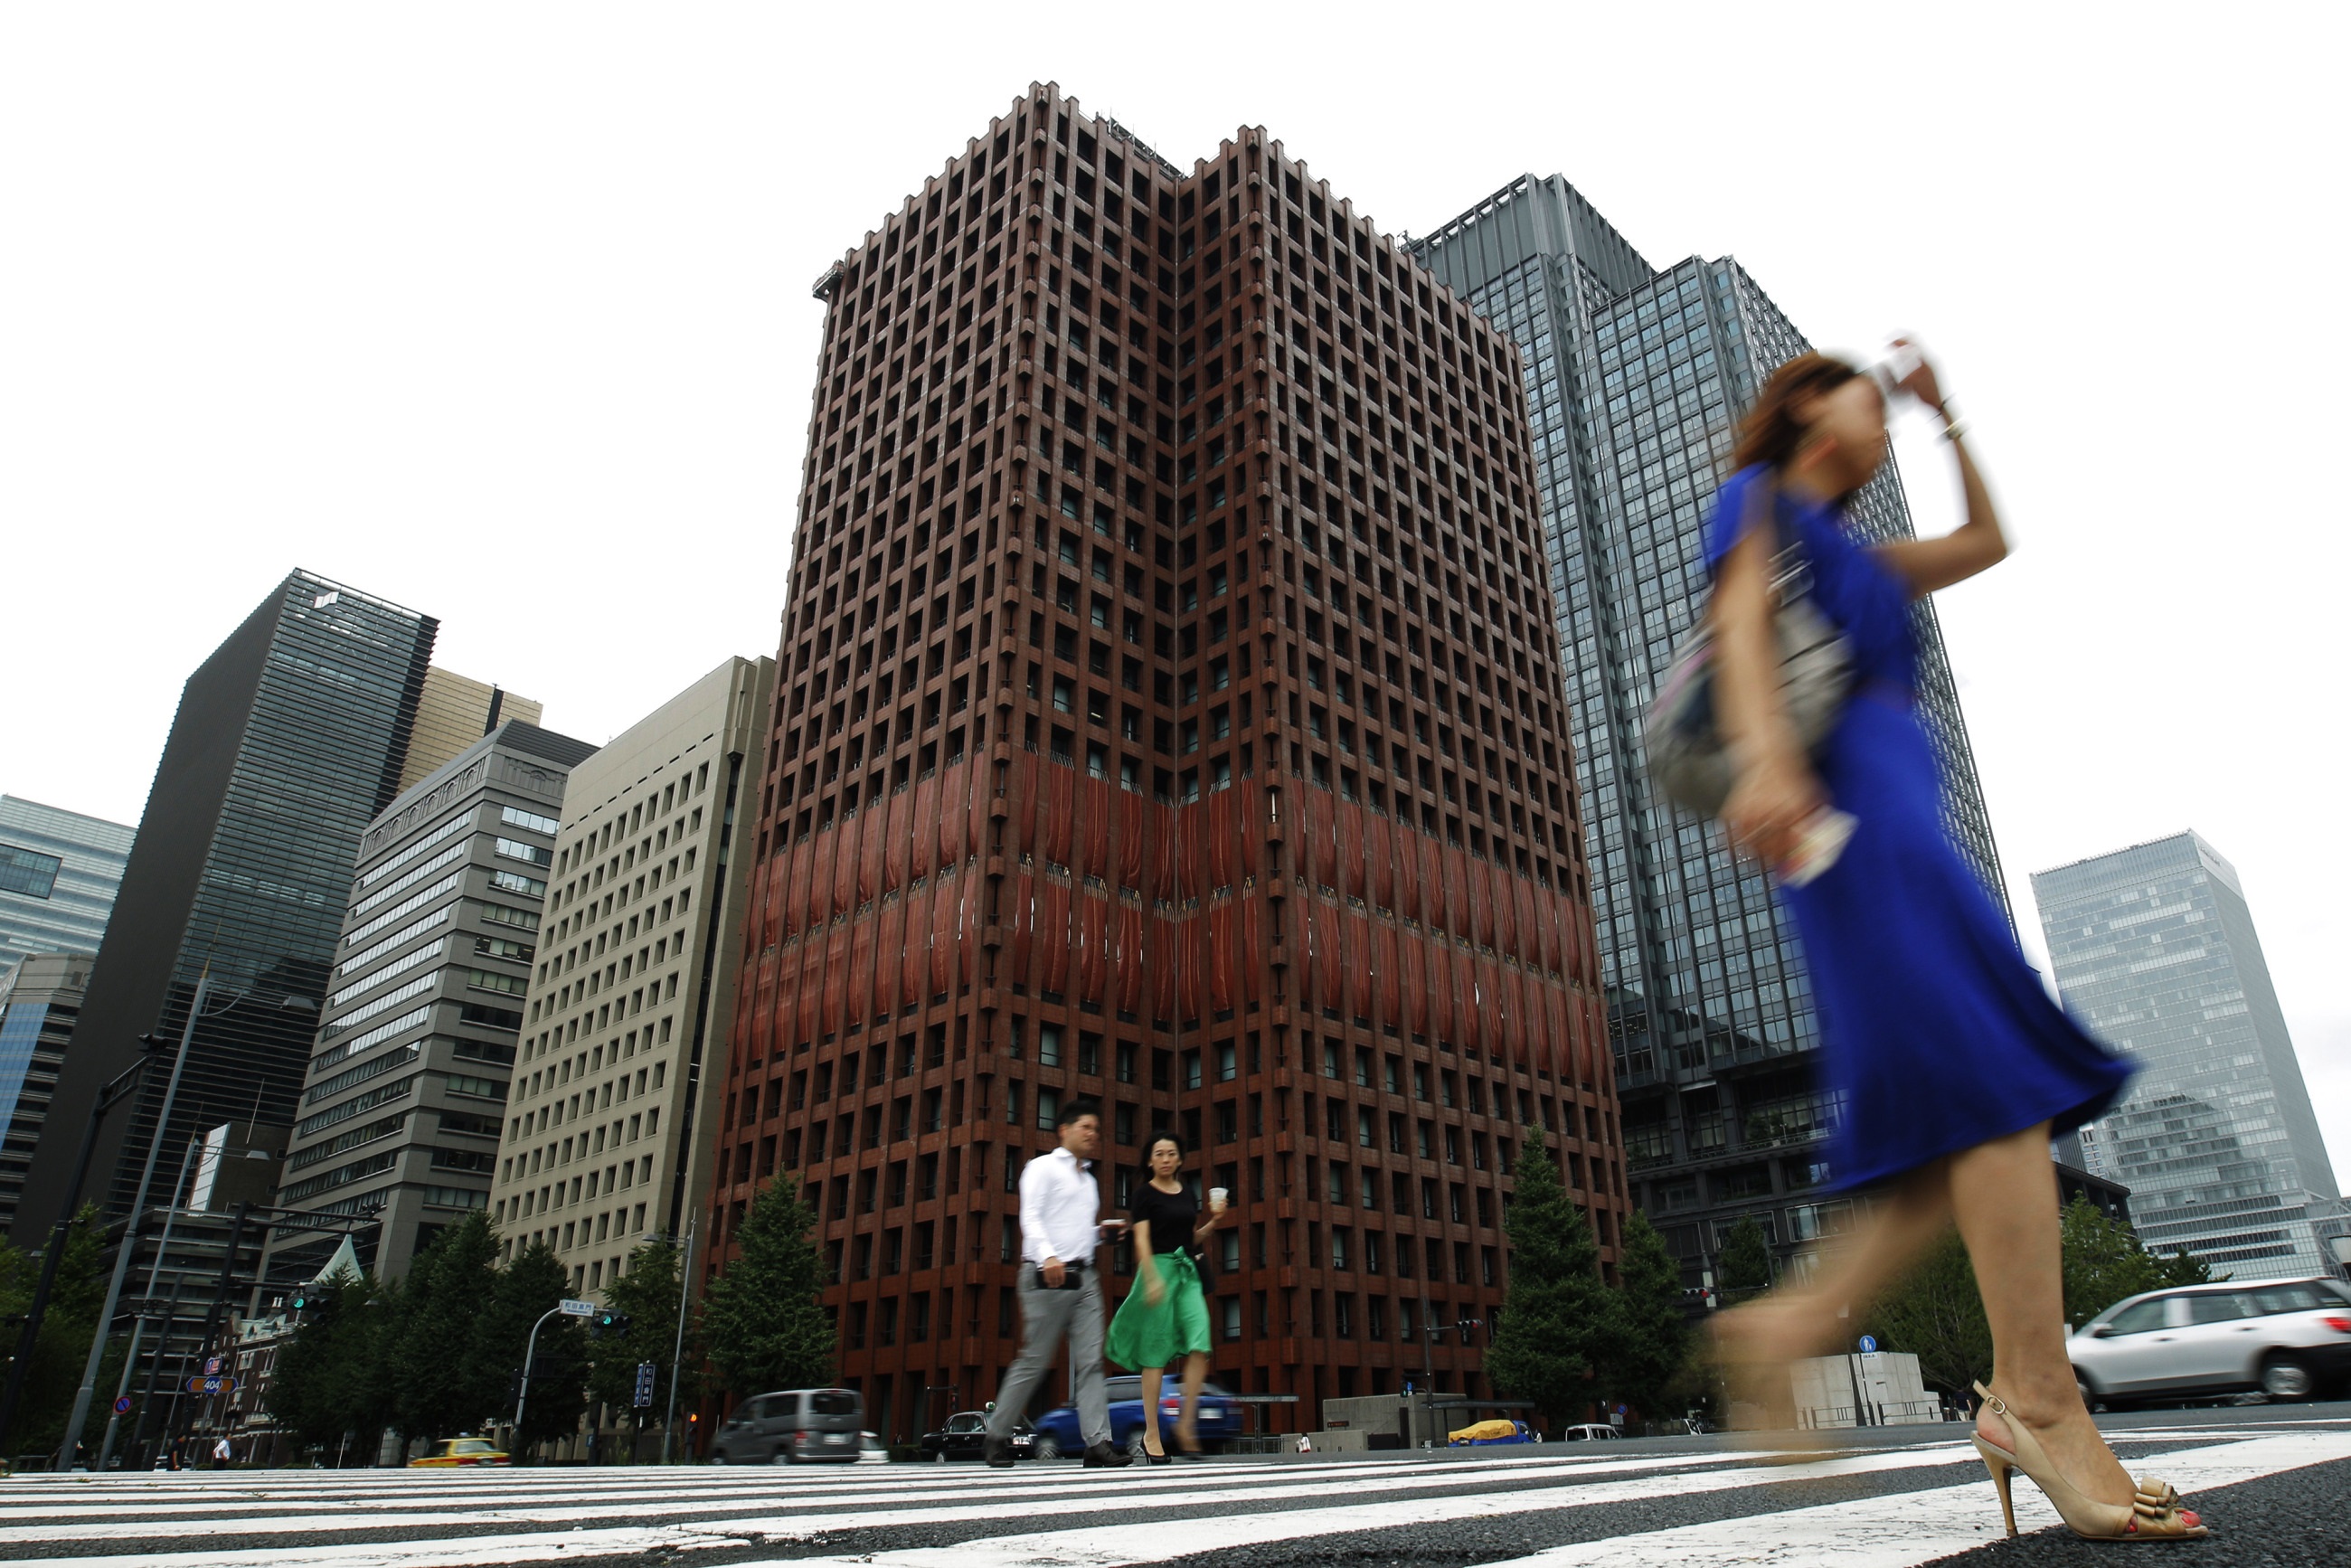 Pedestrians cross a road in front of Tokio Marine Holdings Inc. headquarters in Tokyo.  | KYODO